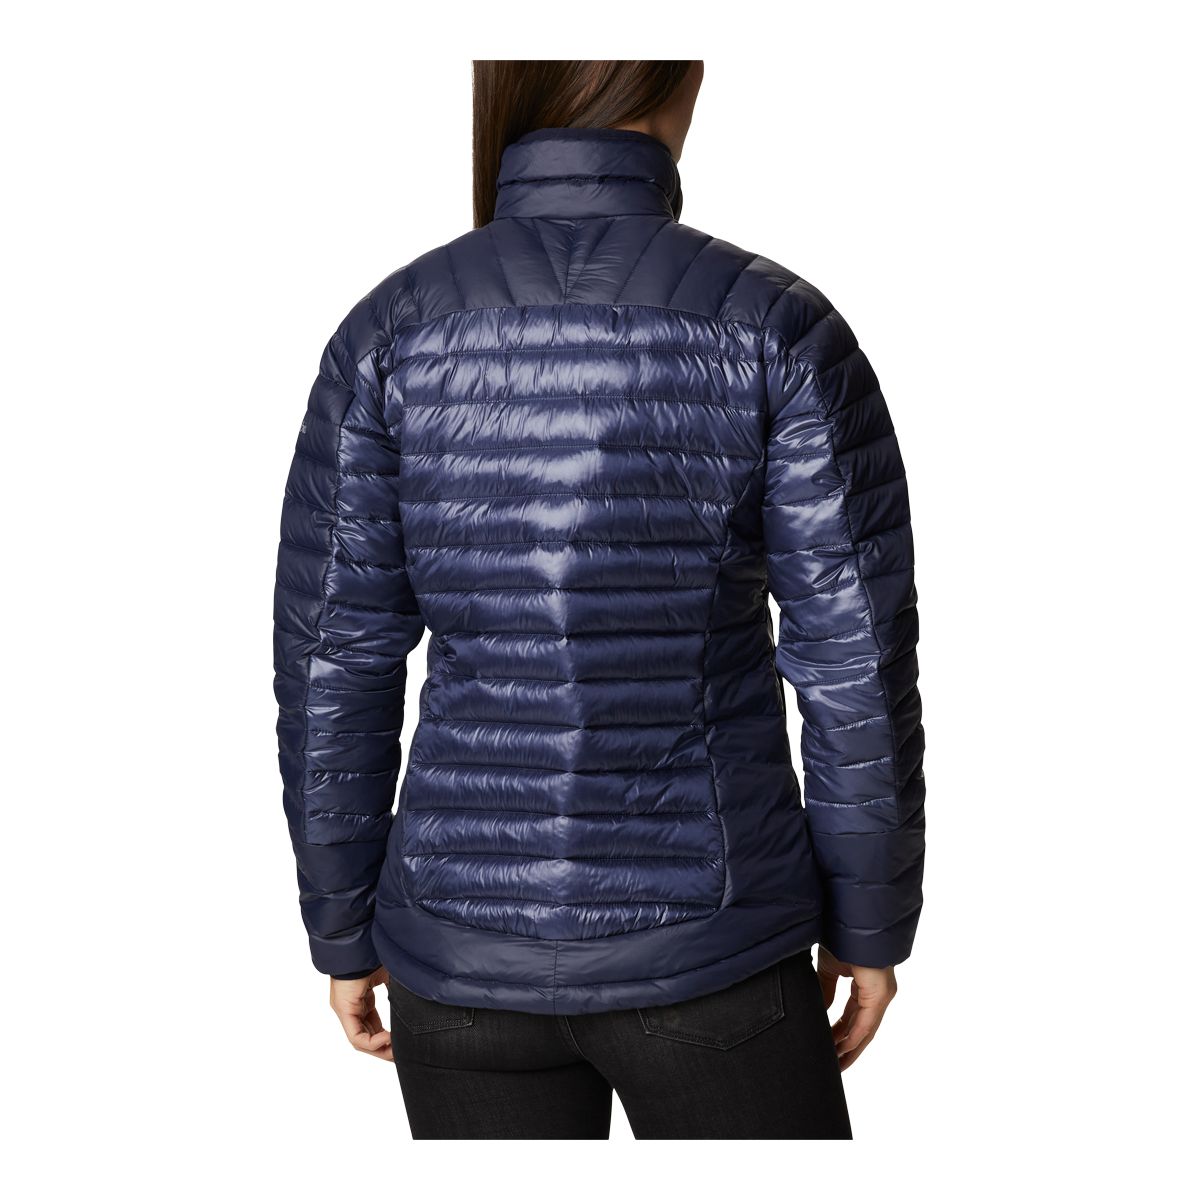 Columbia Women's Labyrinth Loop Midlayer Puffer Jacket, Insulated